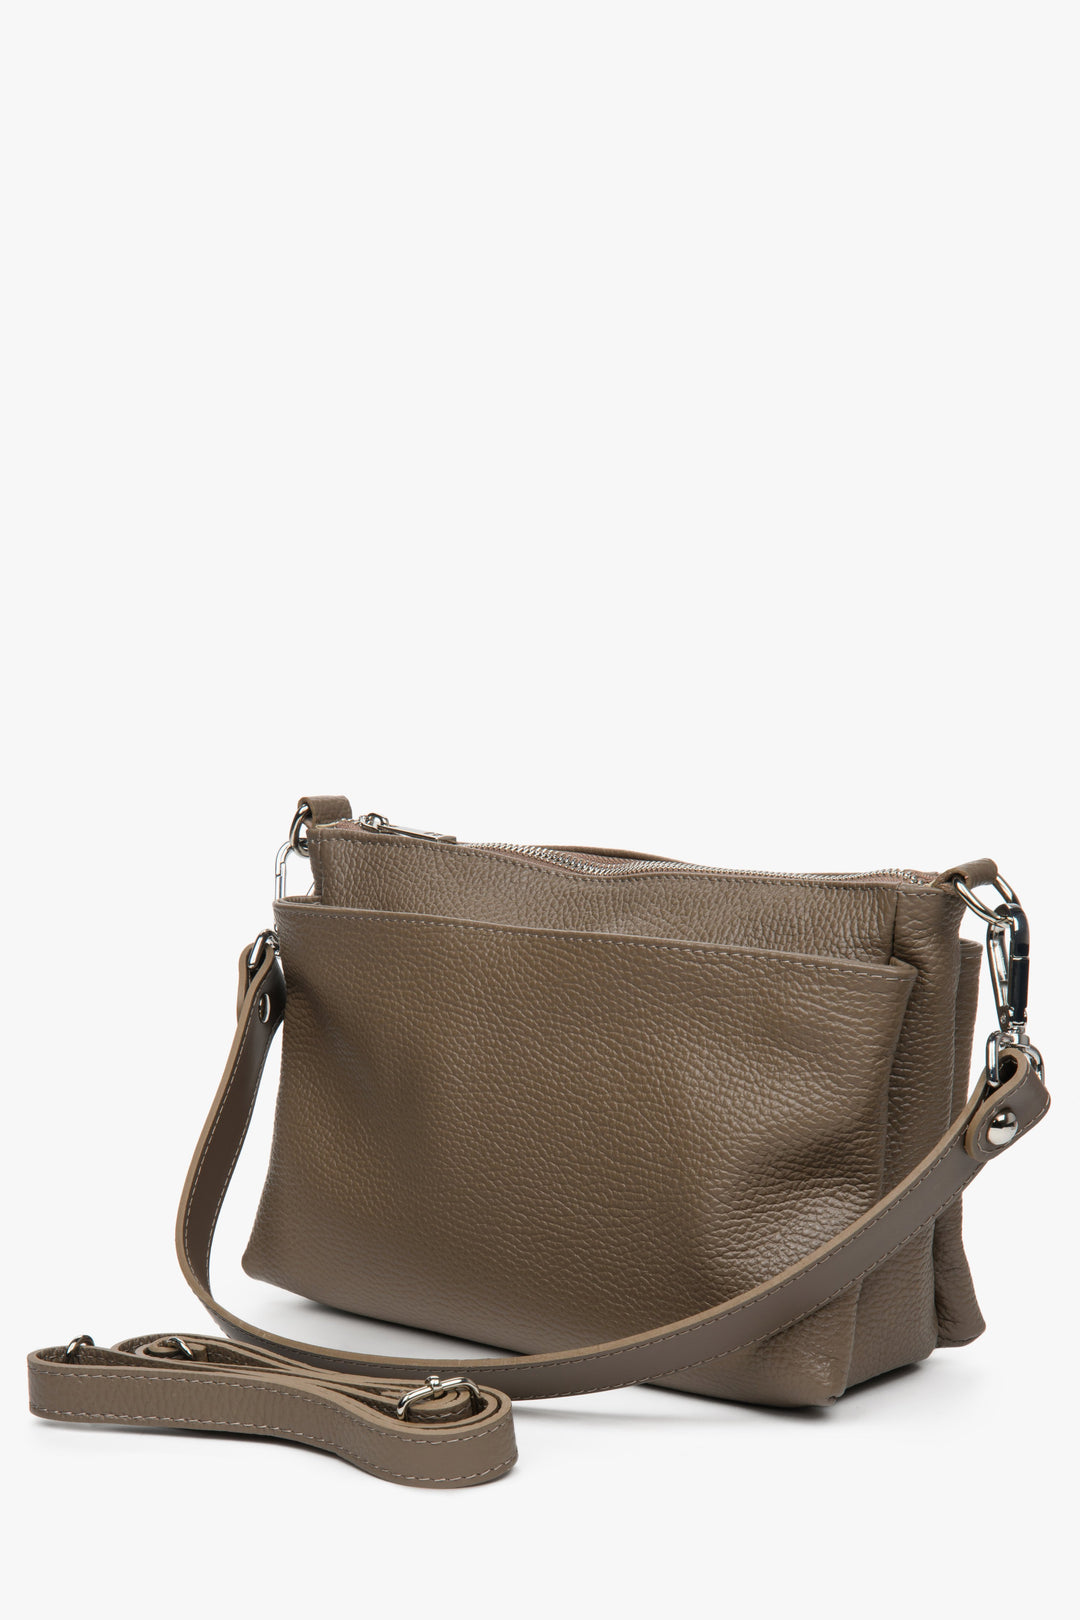 Women's Brown Estro crossbody bag made from genuine leather with a zipper.